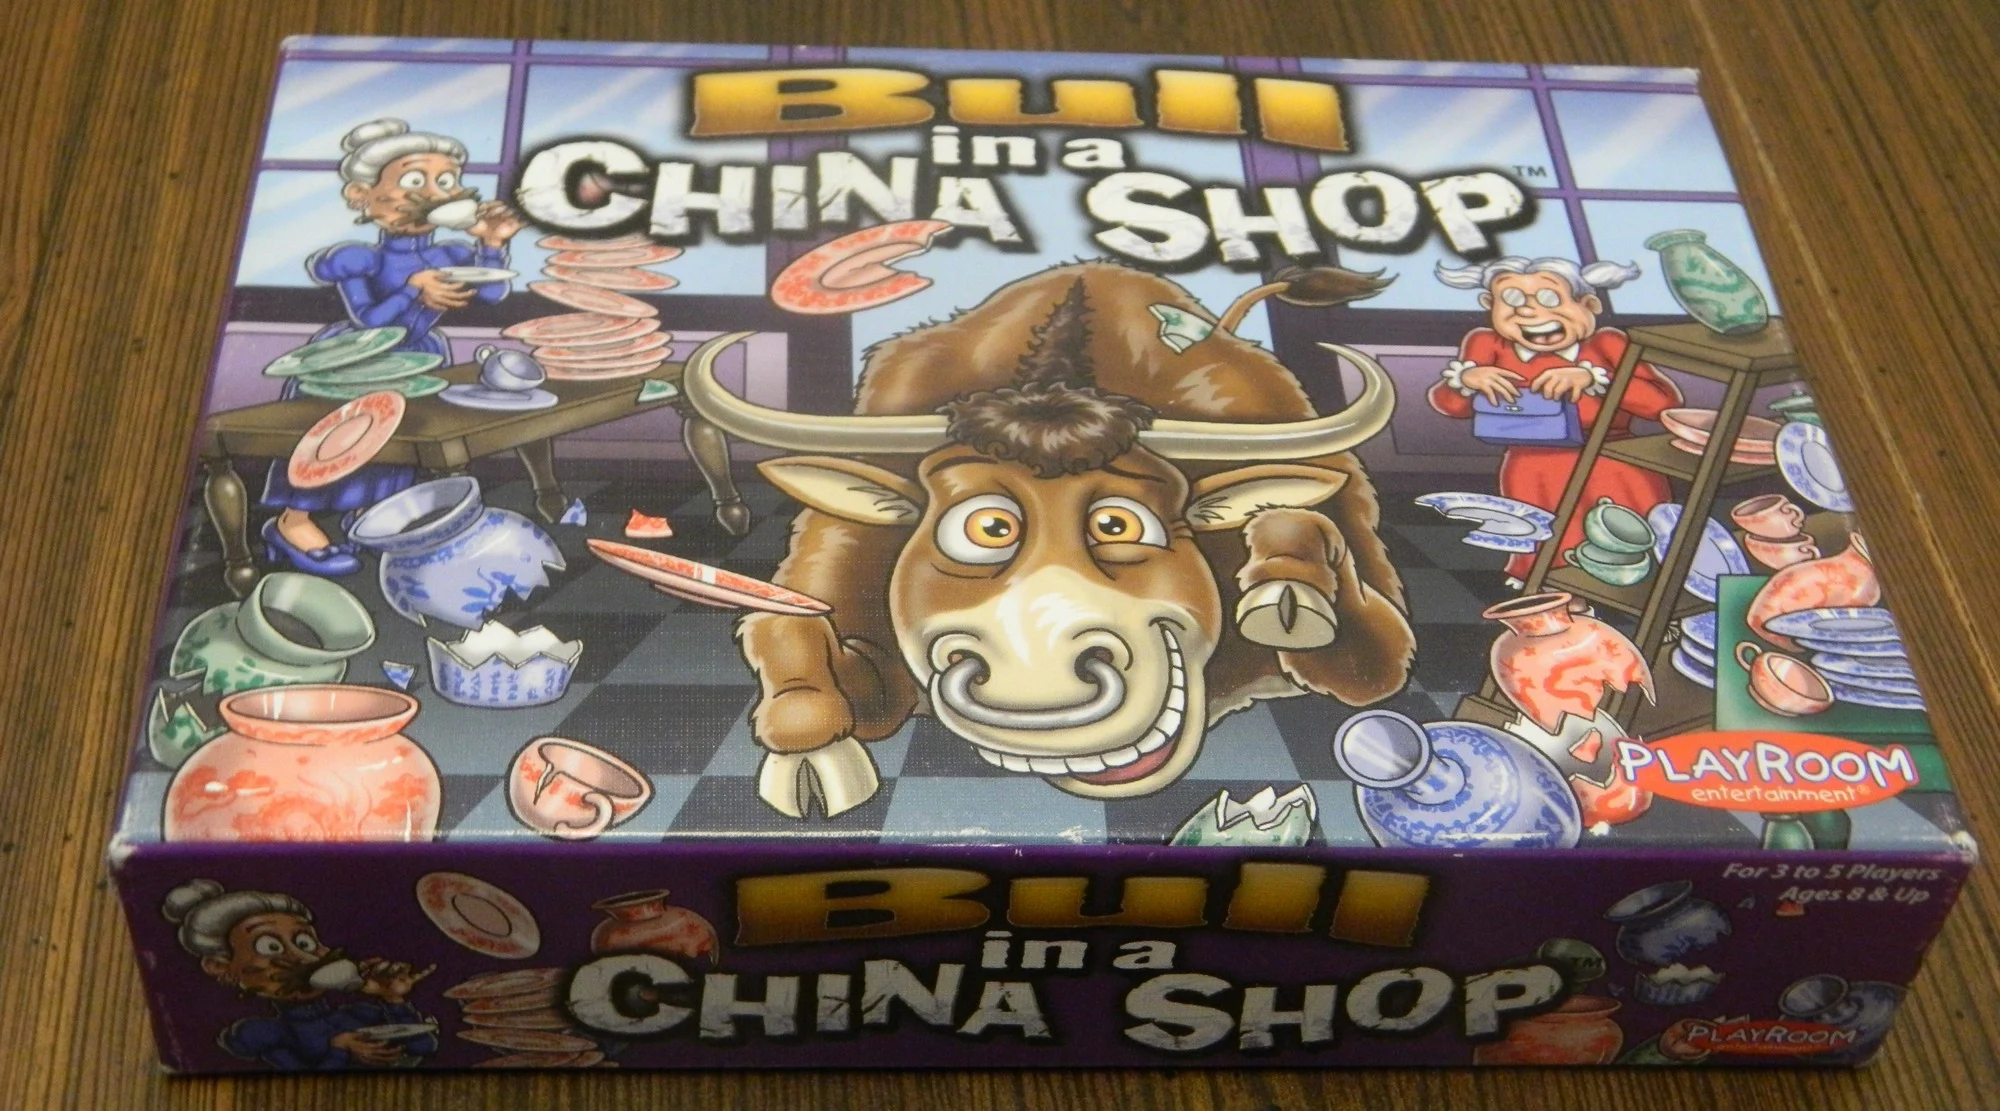 Bull in a China Shop Playroom Entertainment Card Game Review - Geeky Hobbies